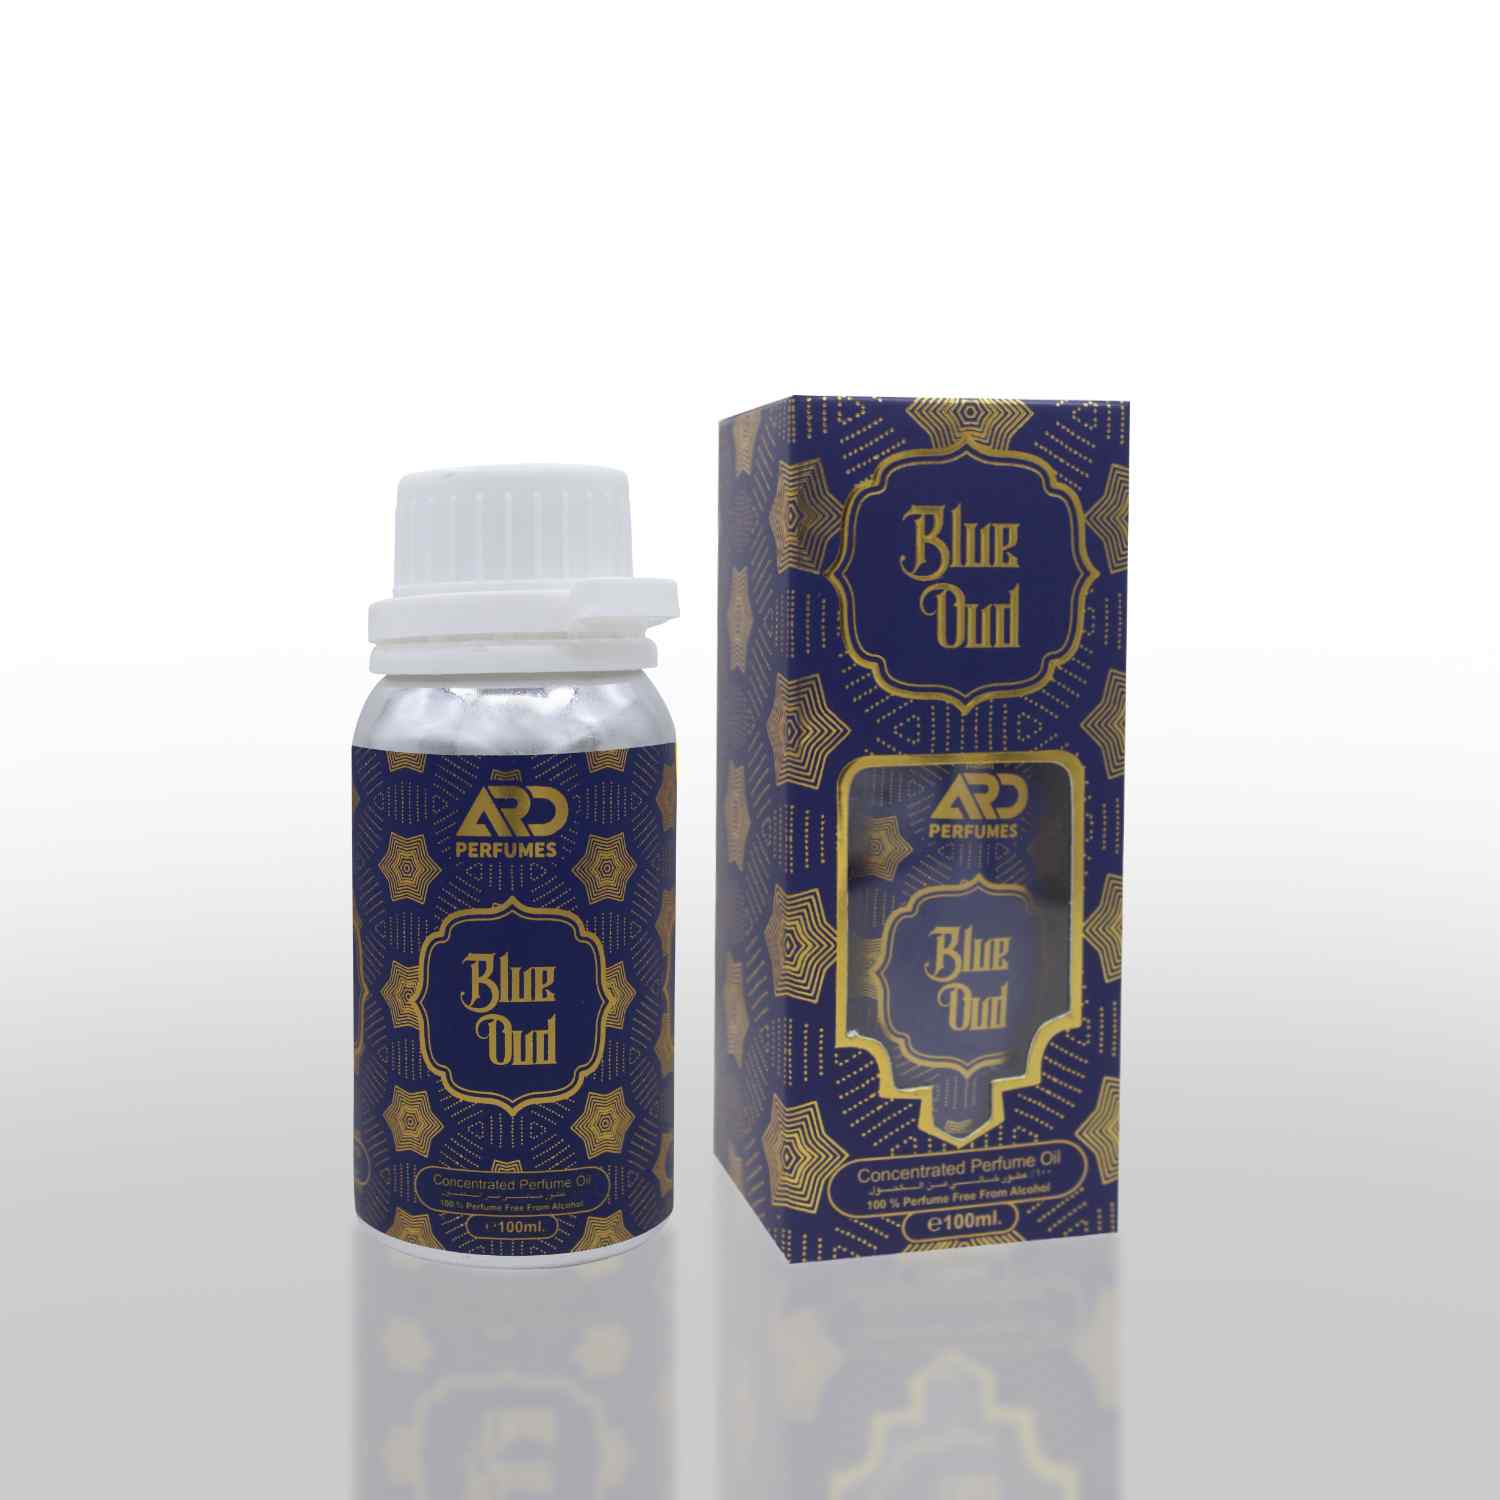 Blue Oud 100ml of ARD PERFUMES masterpiece Blue Oud that takes you into a world of wonder and mystery